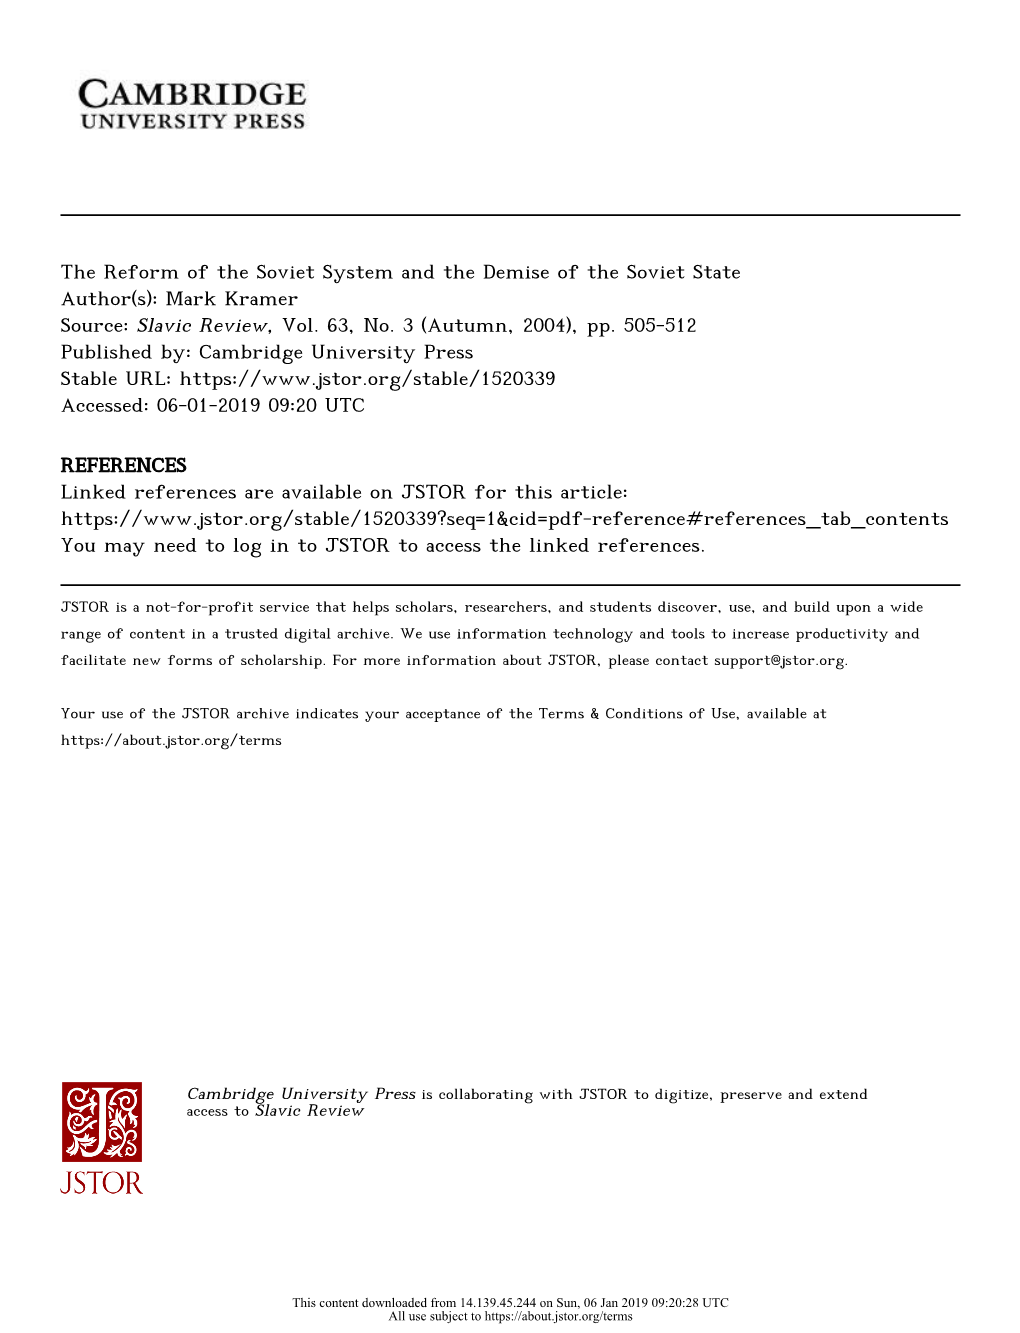 The Reform of the Soviet System and the Demise of the Soviet State Author(S): Mark Kramer Source: Slavic Review, Vol